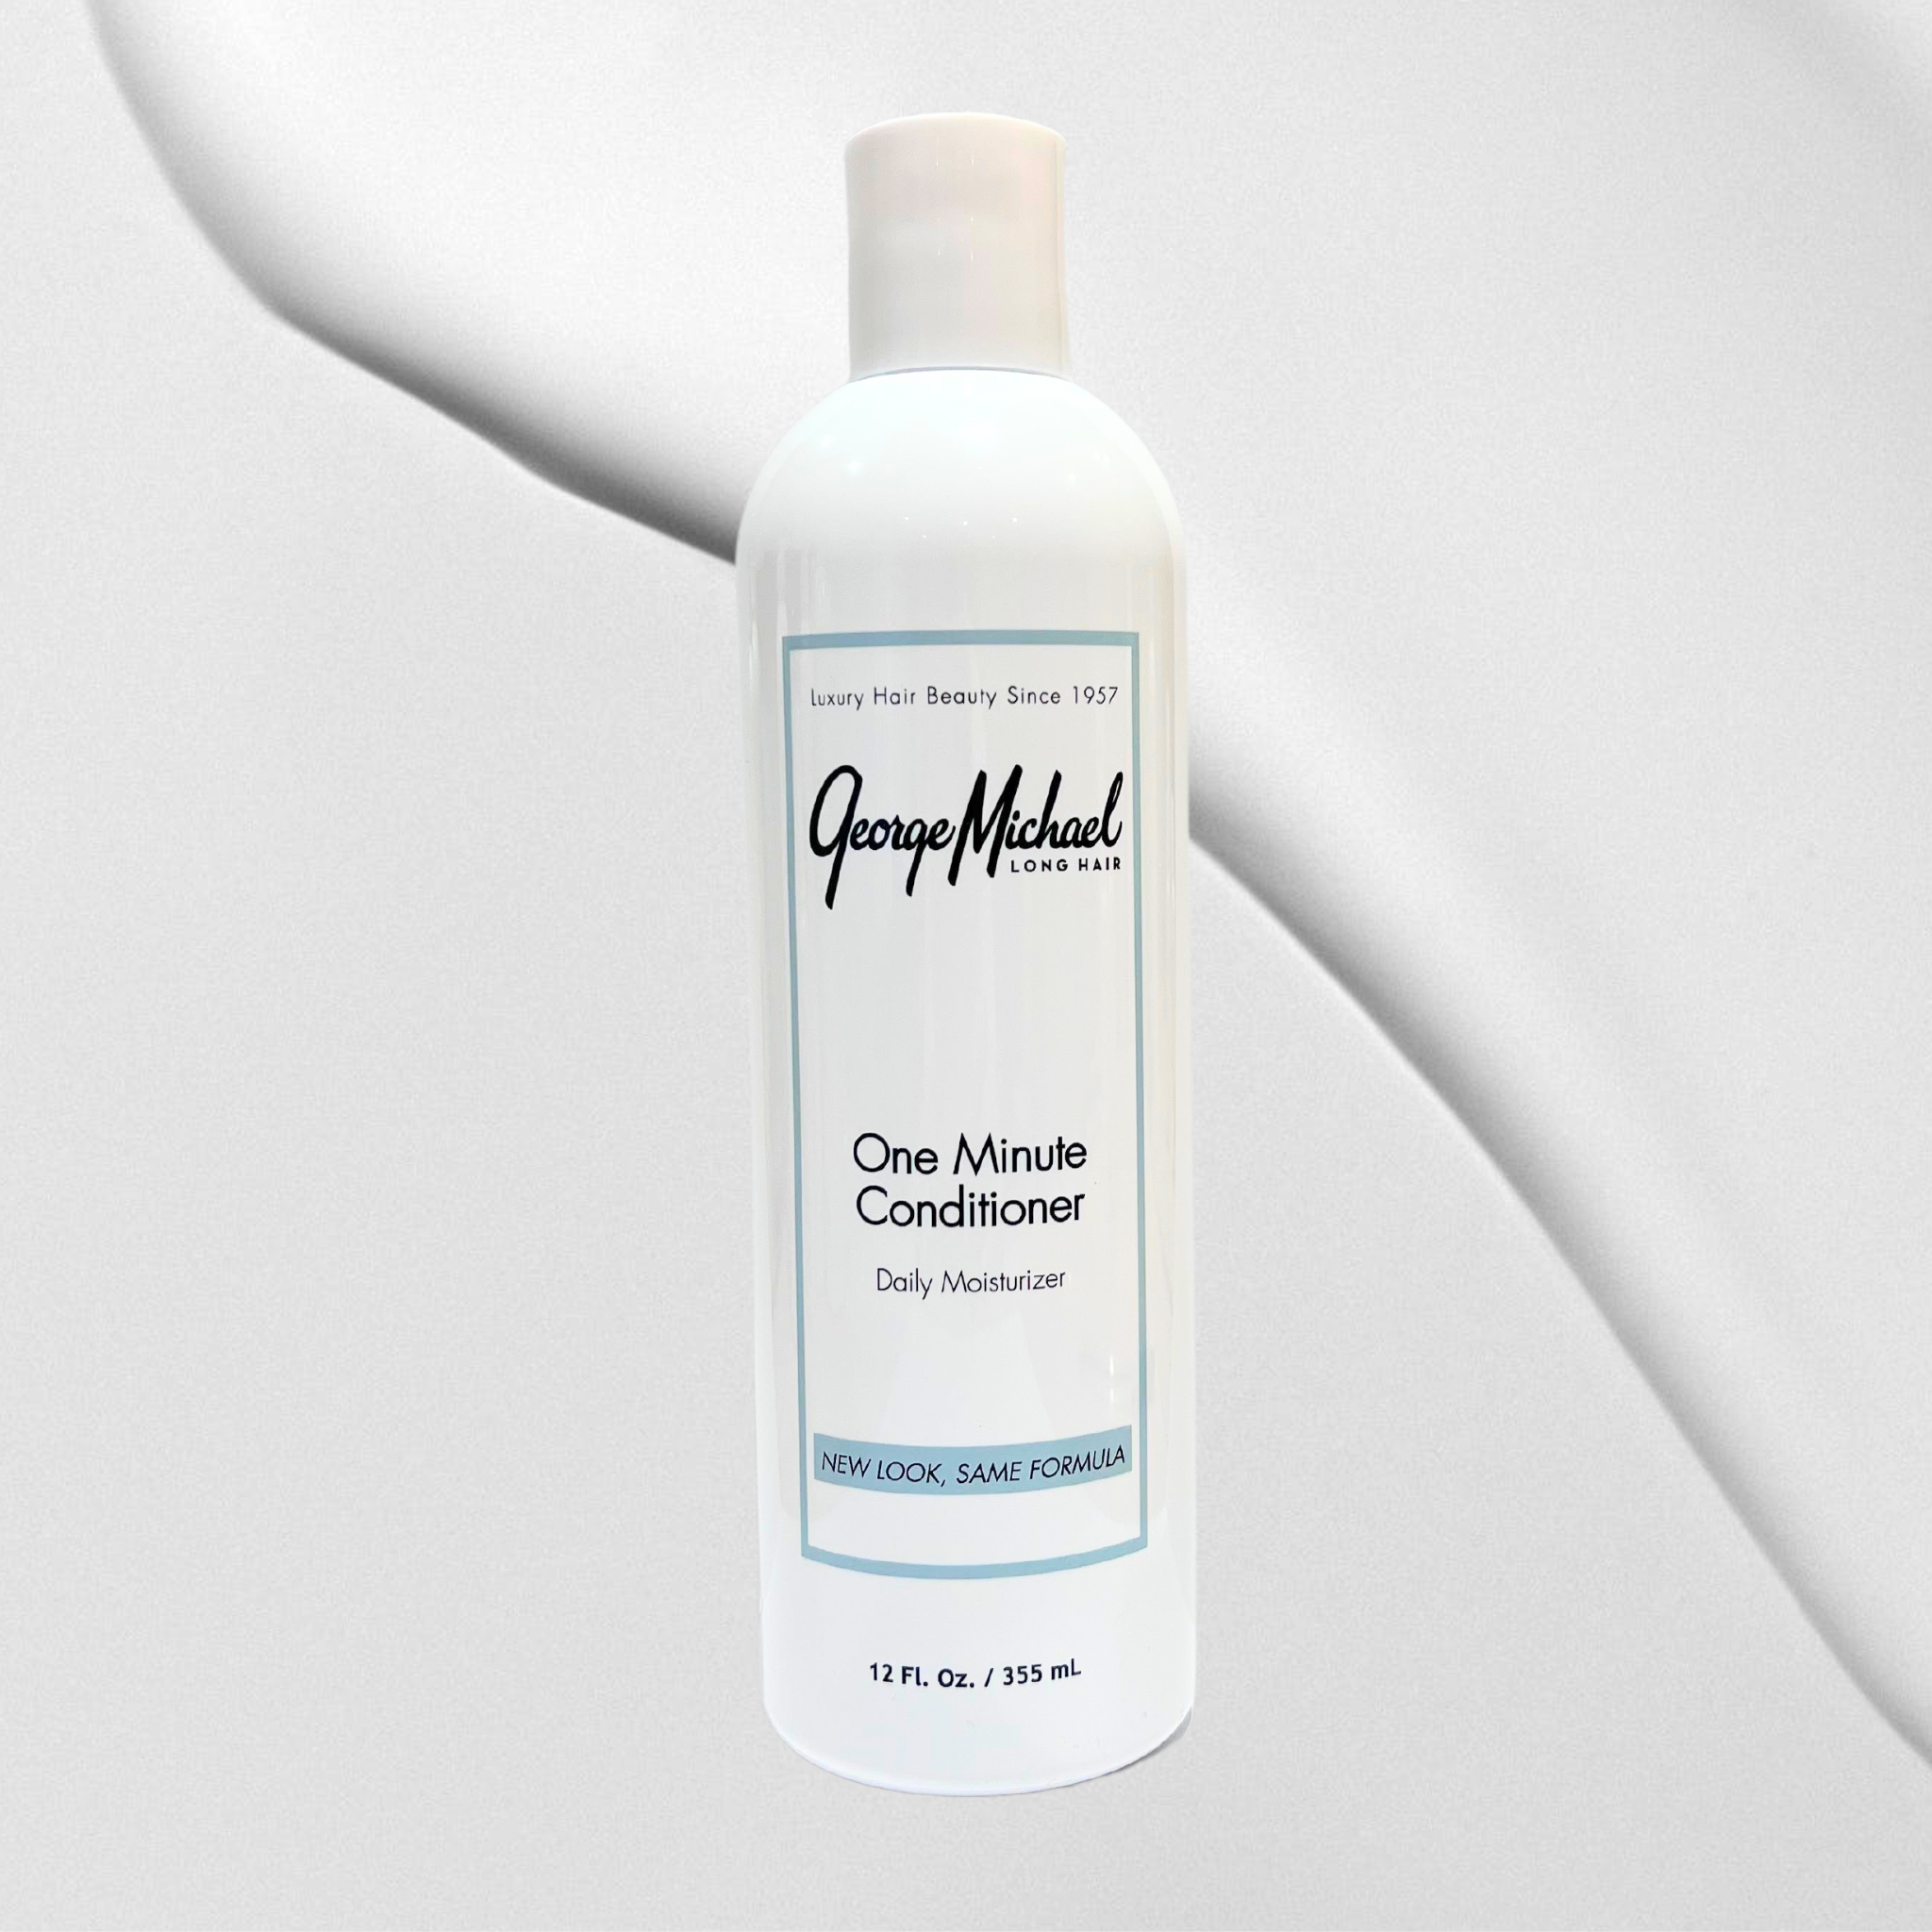 GMLH One Minute Conditioner